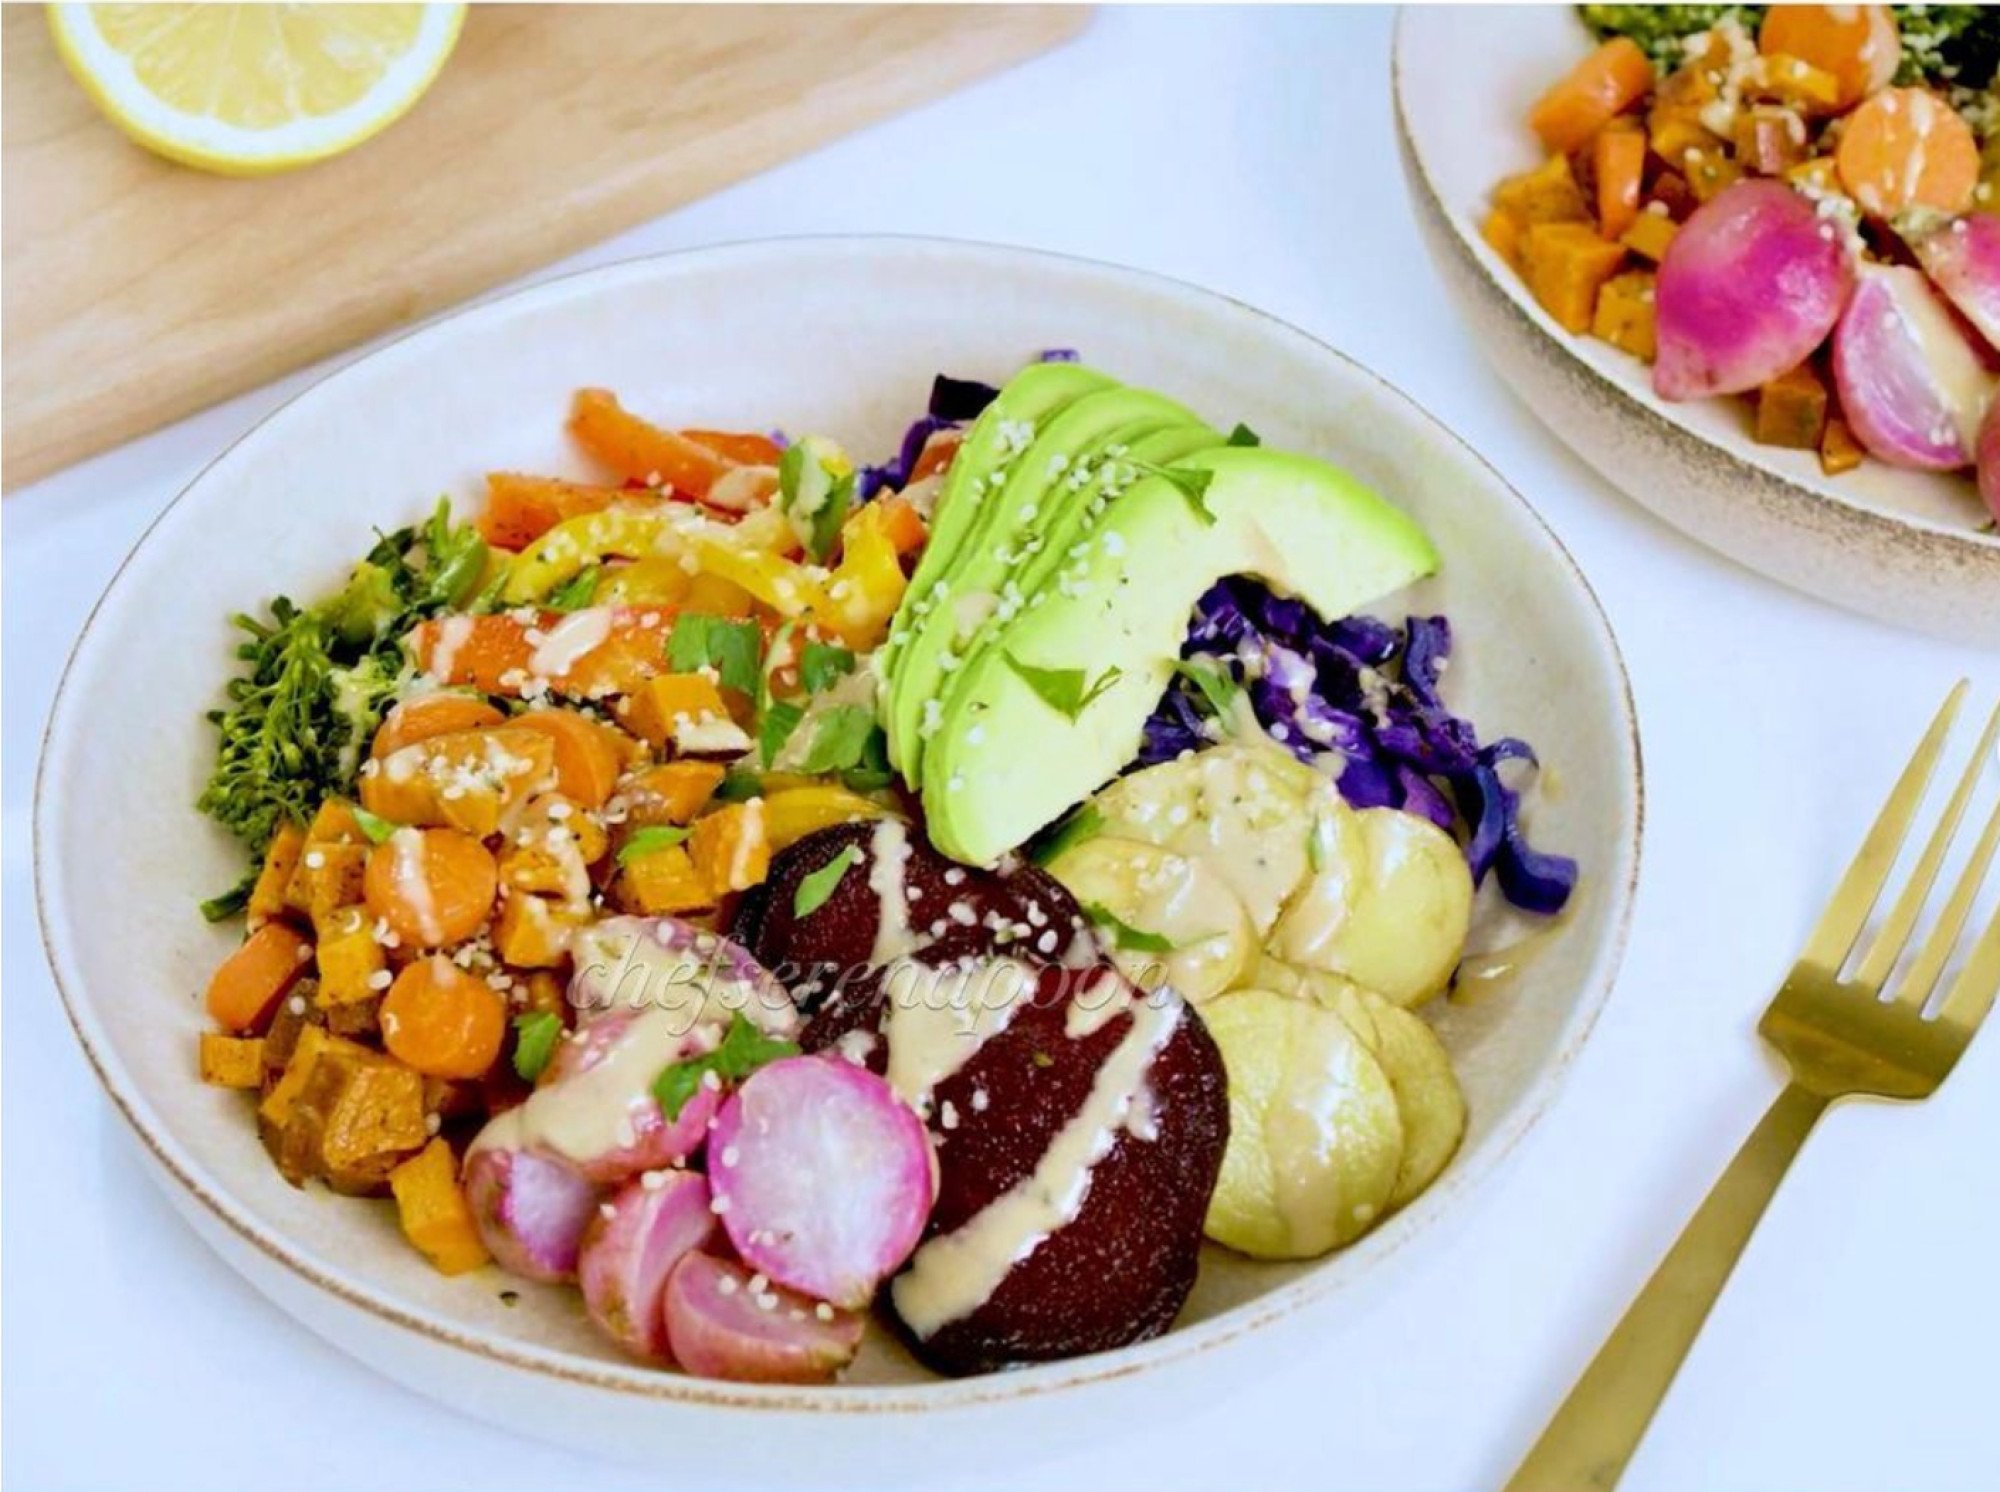 Serena Poon’s roasted rainbow chakra bowl contains ingredients that Poon says support all the chakras. The ingredients are high in beta-carotene and iron to support reproductive health and organs. Photo: Instagram